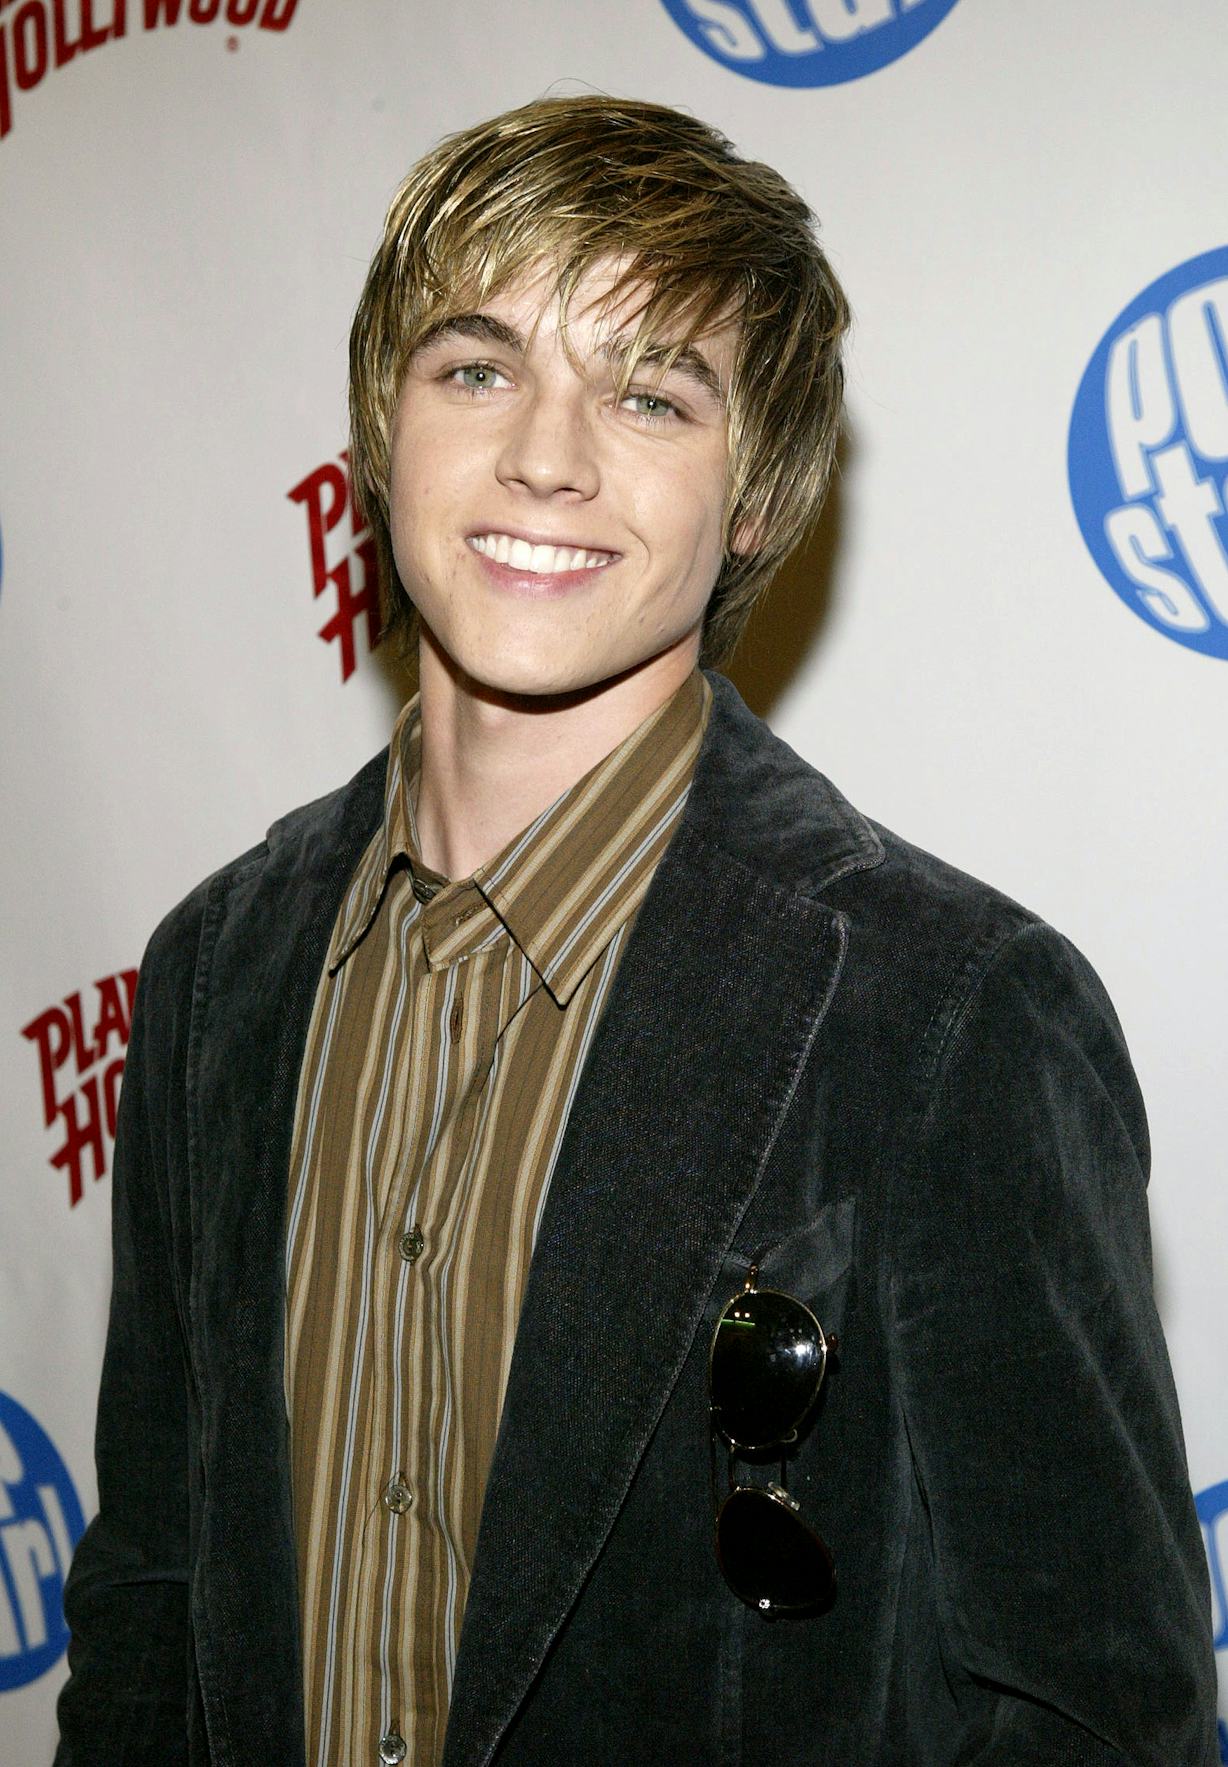 What Is Jesse Mccartney Up To You Know Youre Curious About Him And His